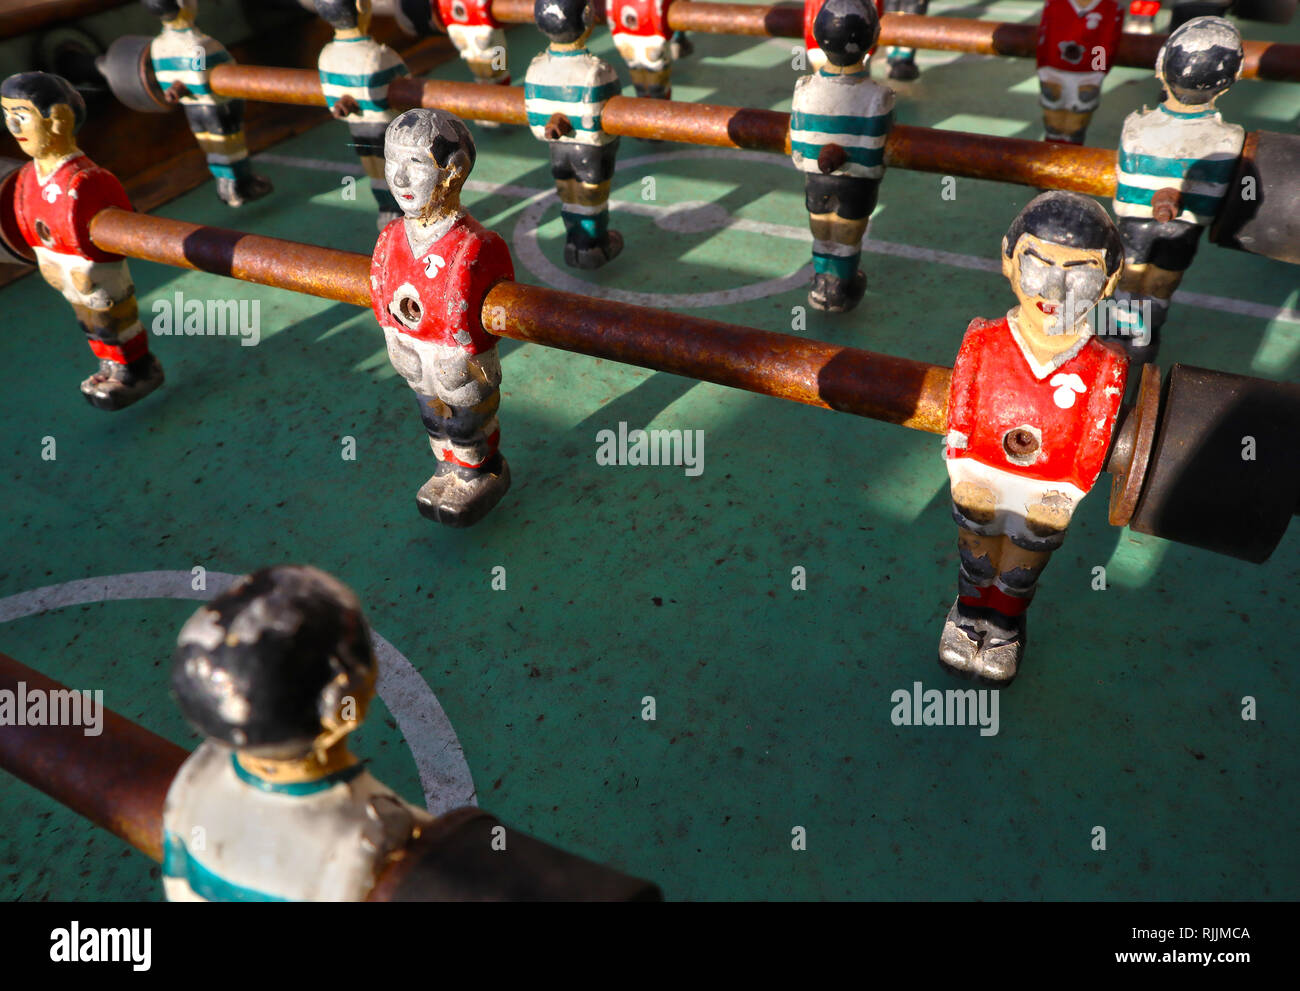 A vintage Subbuteo table outside the bar/ cafe in the picturesque village of Sorgaçosa, Central Portugal. Stock Photo